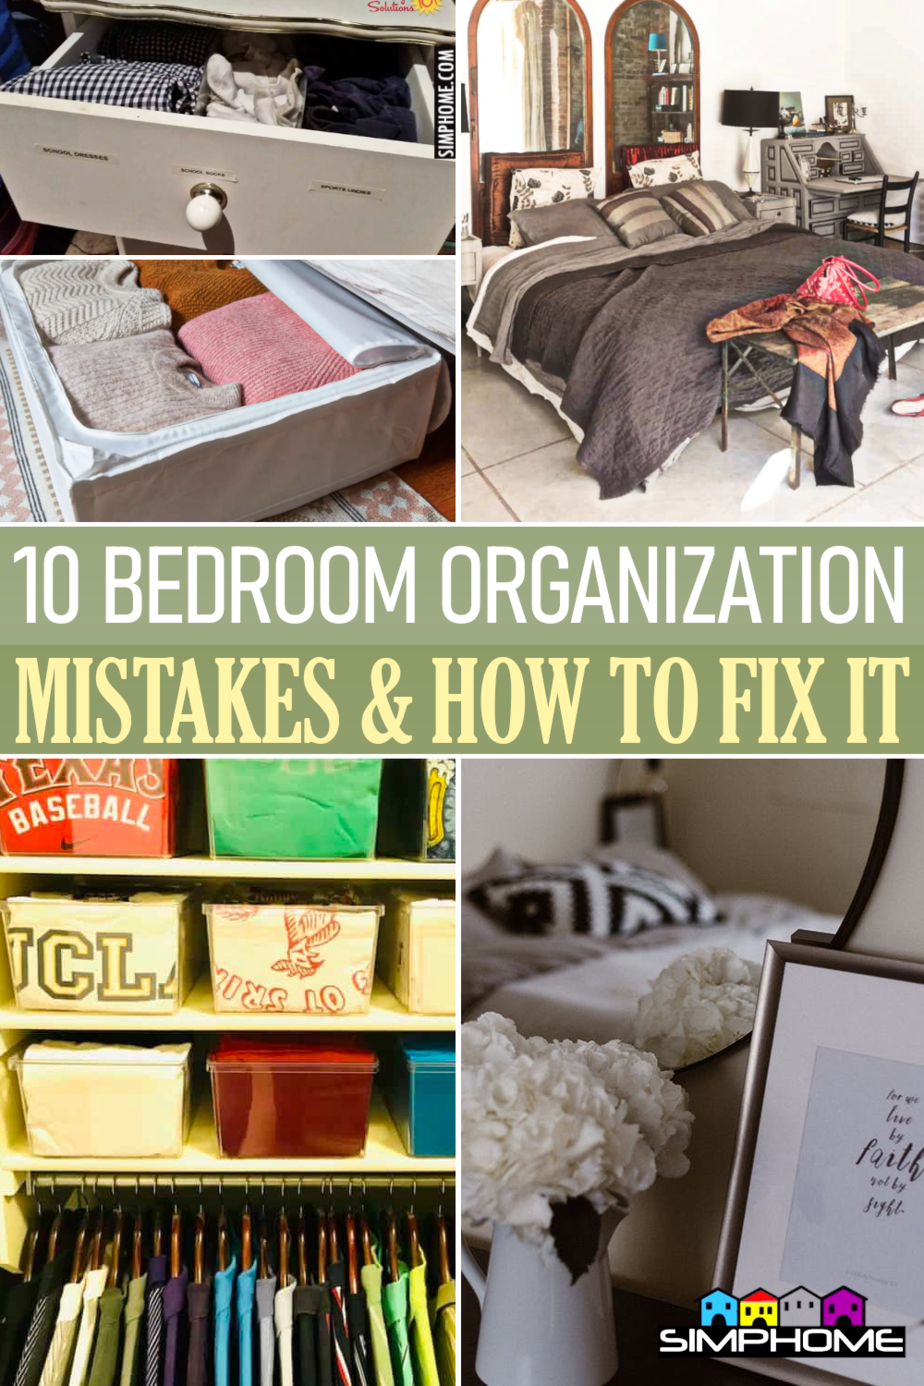 10 Bedroom Organization and How to Fix it via Simphome.comFeatured